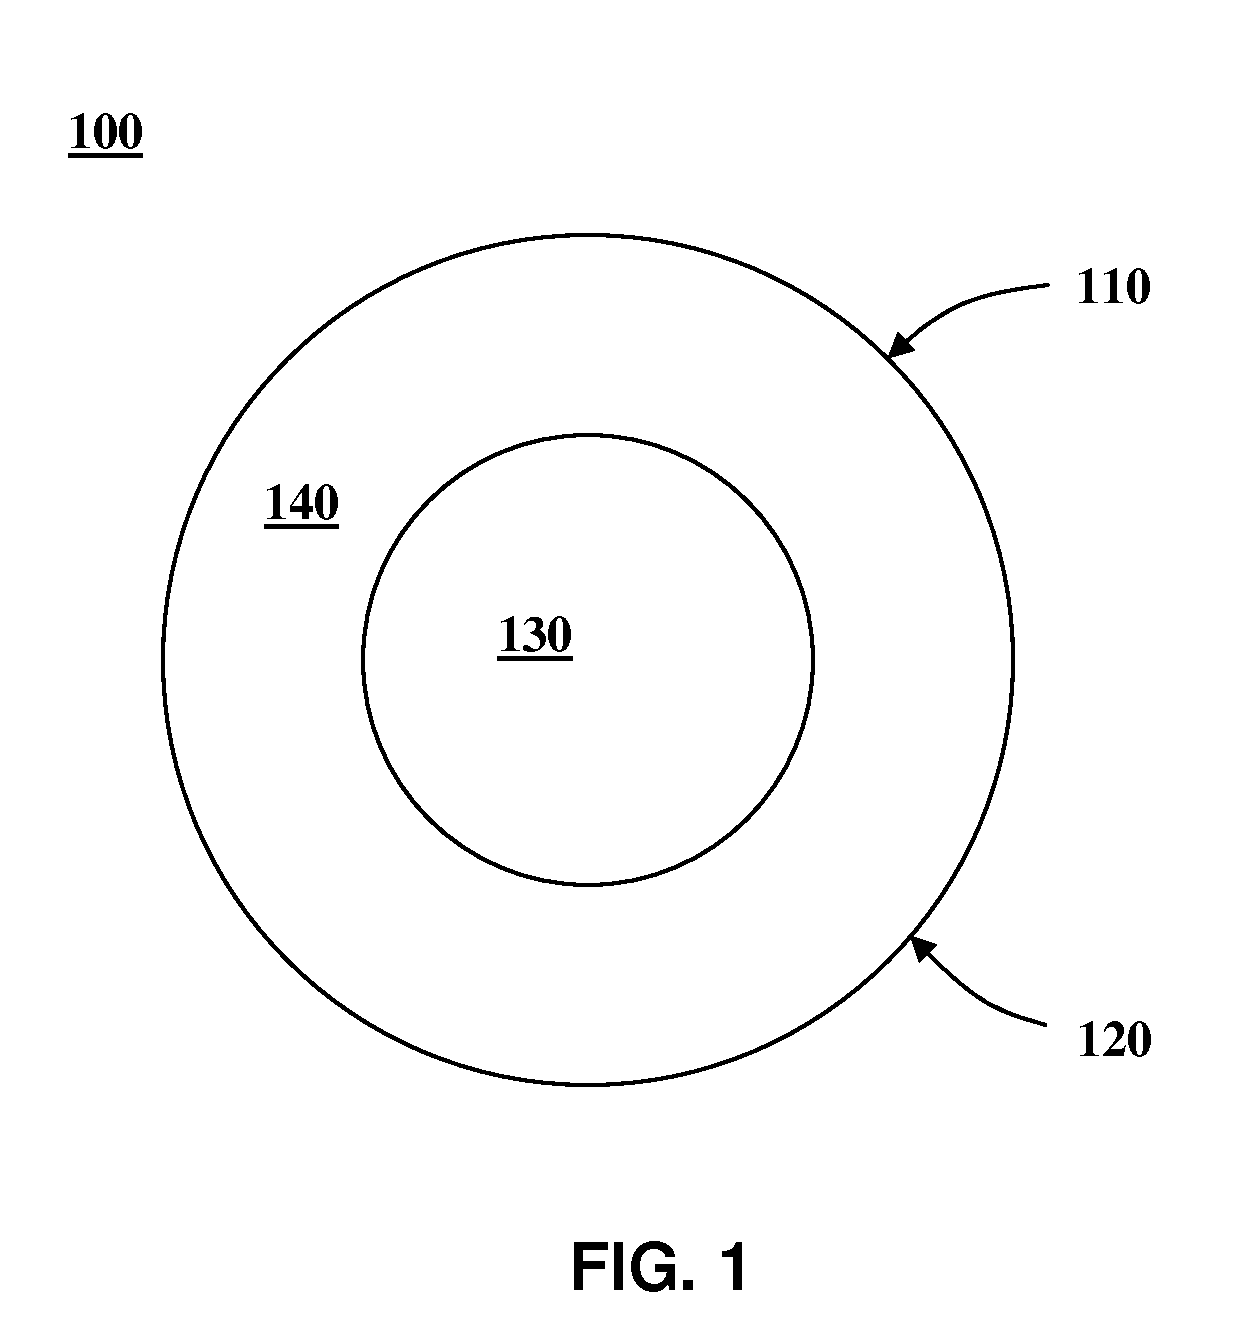 Polymer compositions suitable for intraocular lenses and related methods